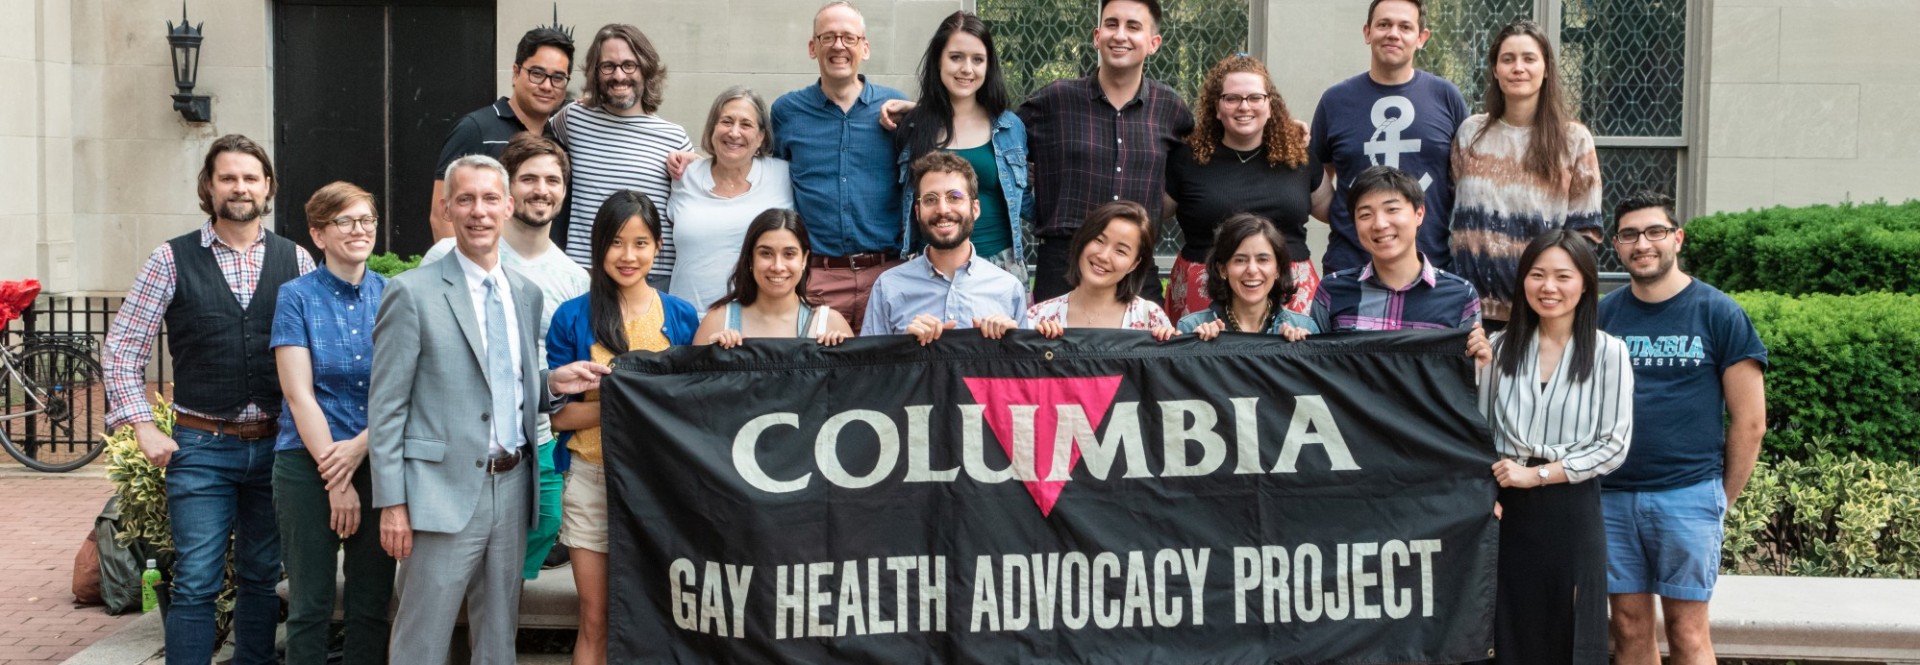 A photo of GHAP's co-founder Laura Pinsky, current GHAP Executive Director, Daniel Chiarilli and a number of GHAP advocates from throughout the program's history.